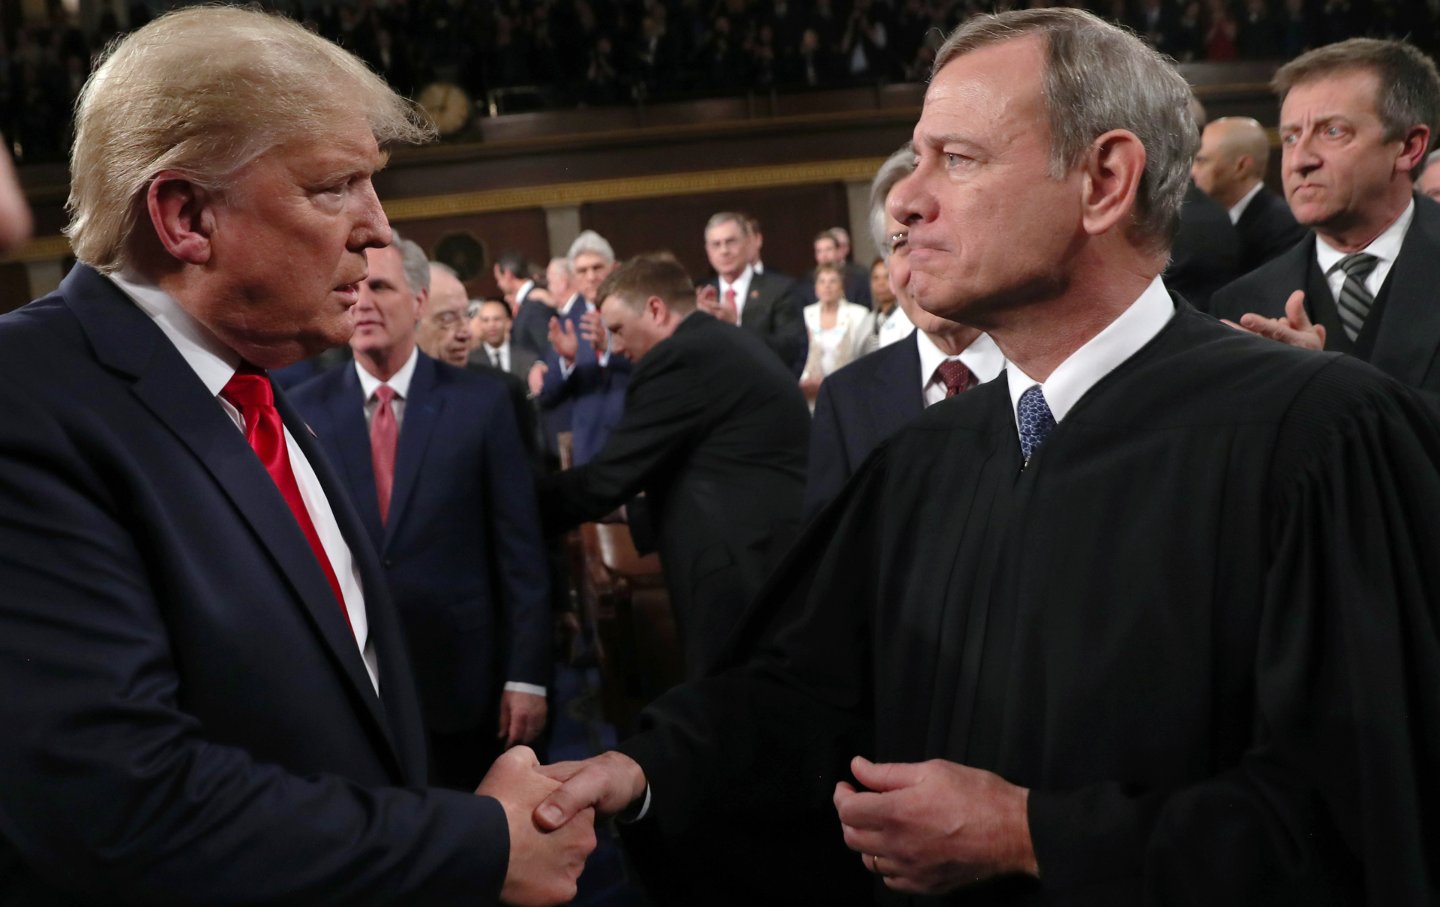 President Donald Trump shakes hands with Supreme Court Chief Justice John Roberts before the State of the Union address in the House chamber on February 4, 2020 in Washington, DC